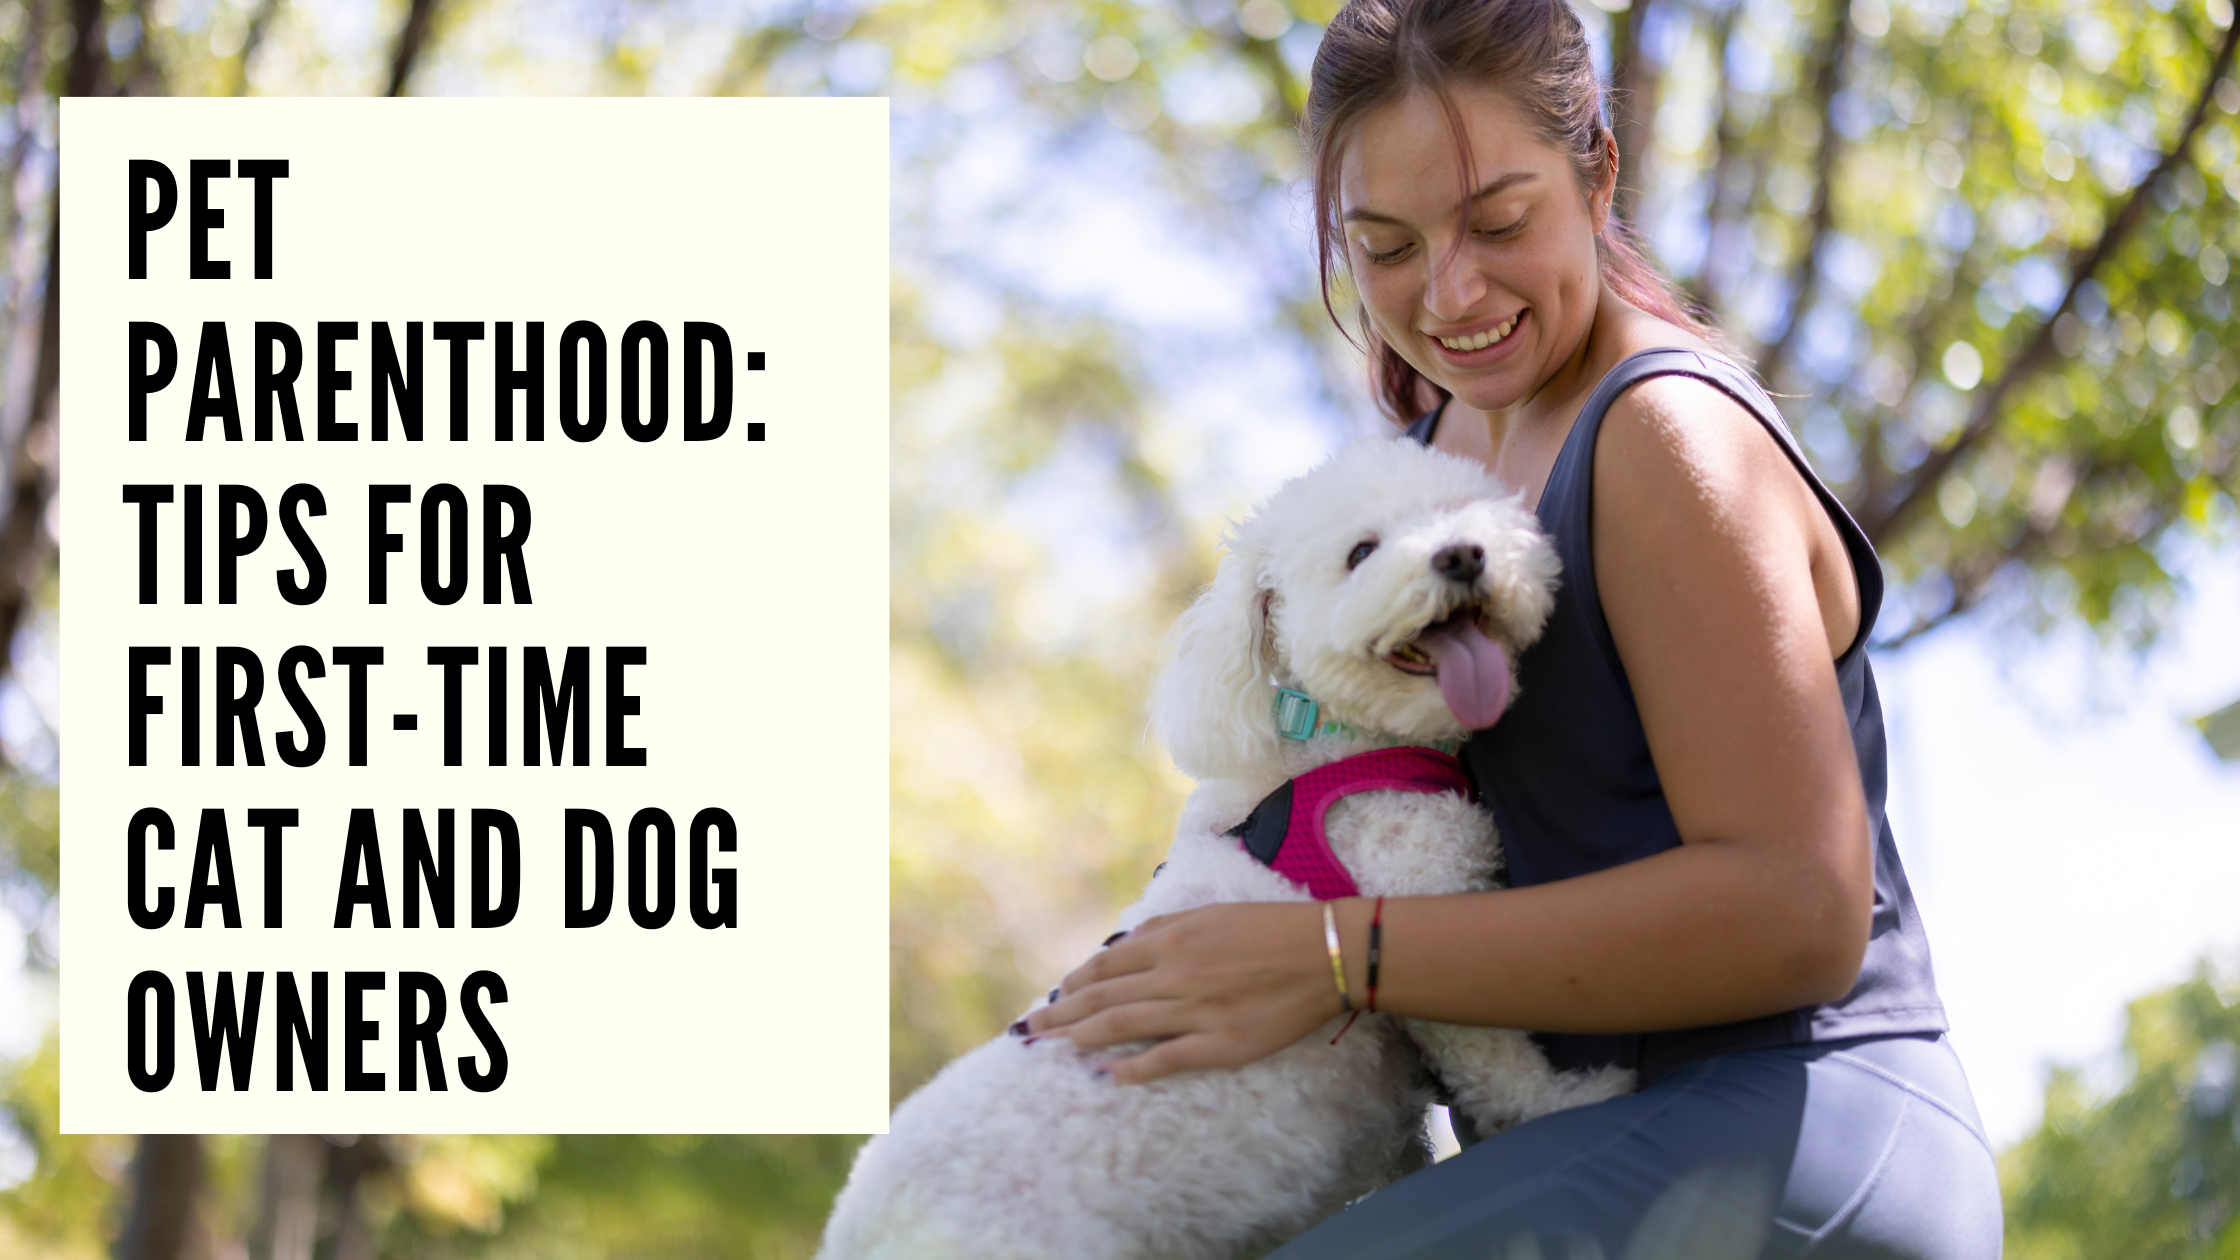 Pet Parenthood Tips for First-Time Cat and Dog Owners